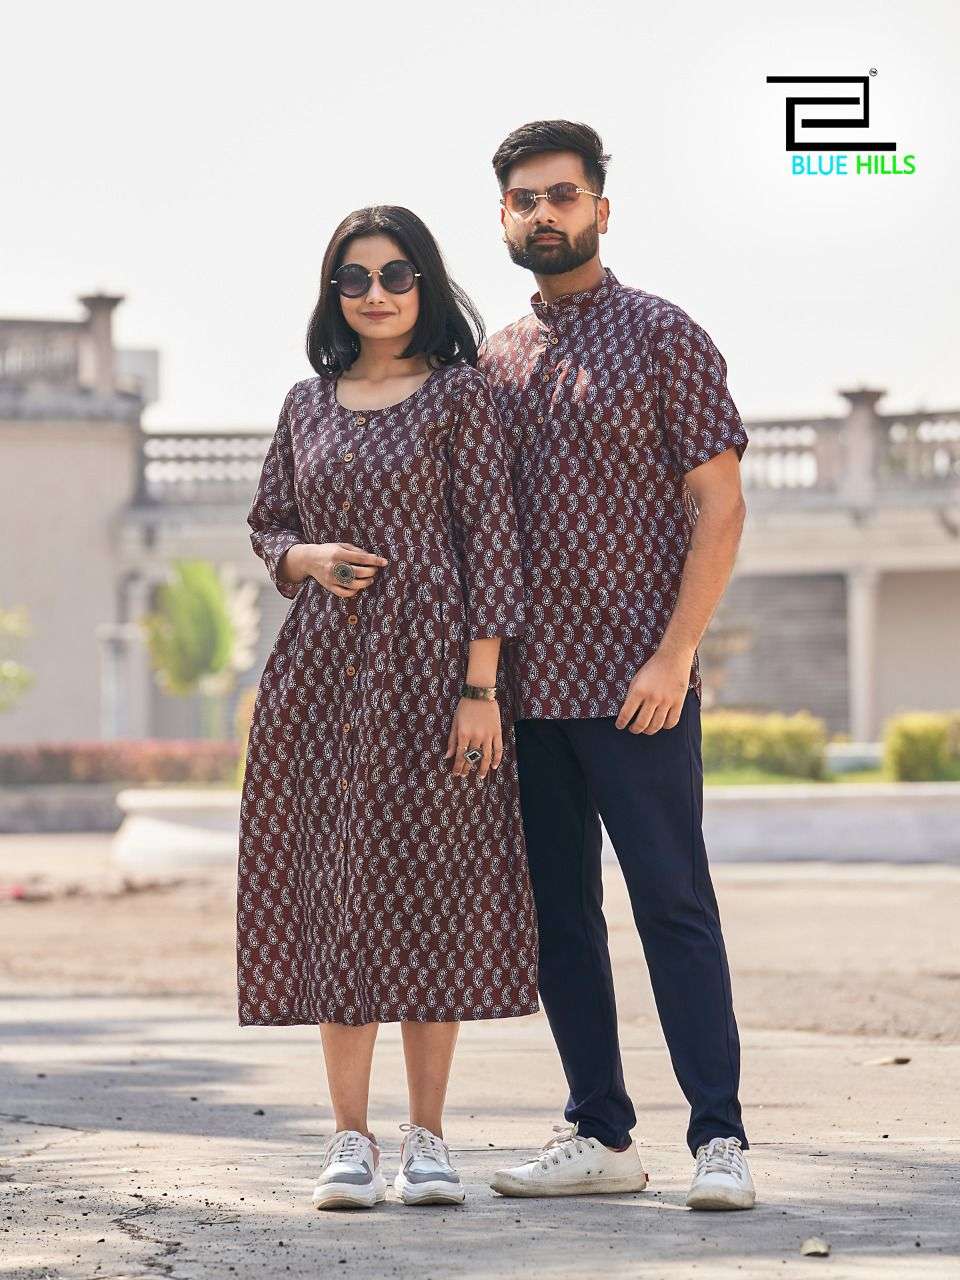 DAZZY CREATION Full Sleeve Printed Couple Sweatshirt - Buy DAZZY CREATION  Full Sleeve Printed Couple Sweatshirt Online at Best Prices in India |  Flipkart.com